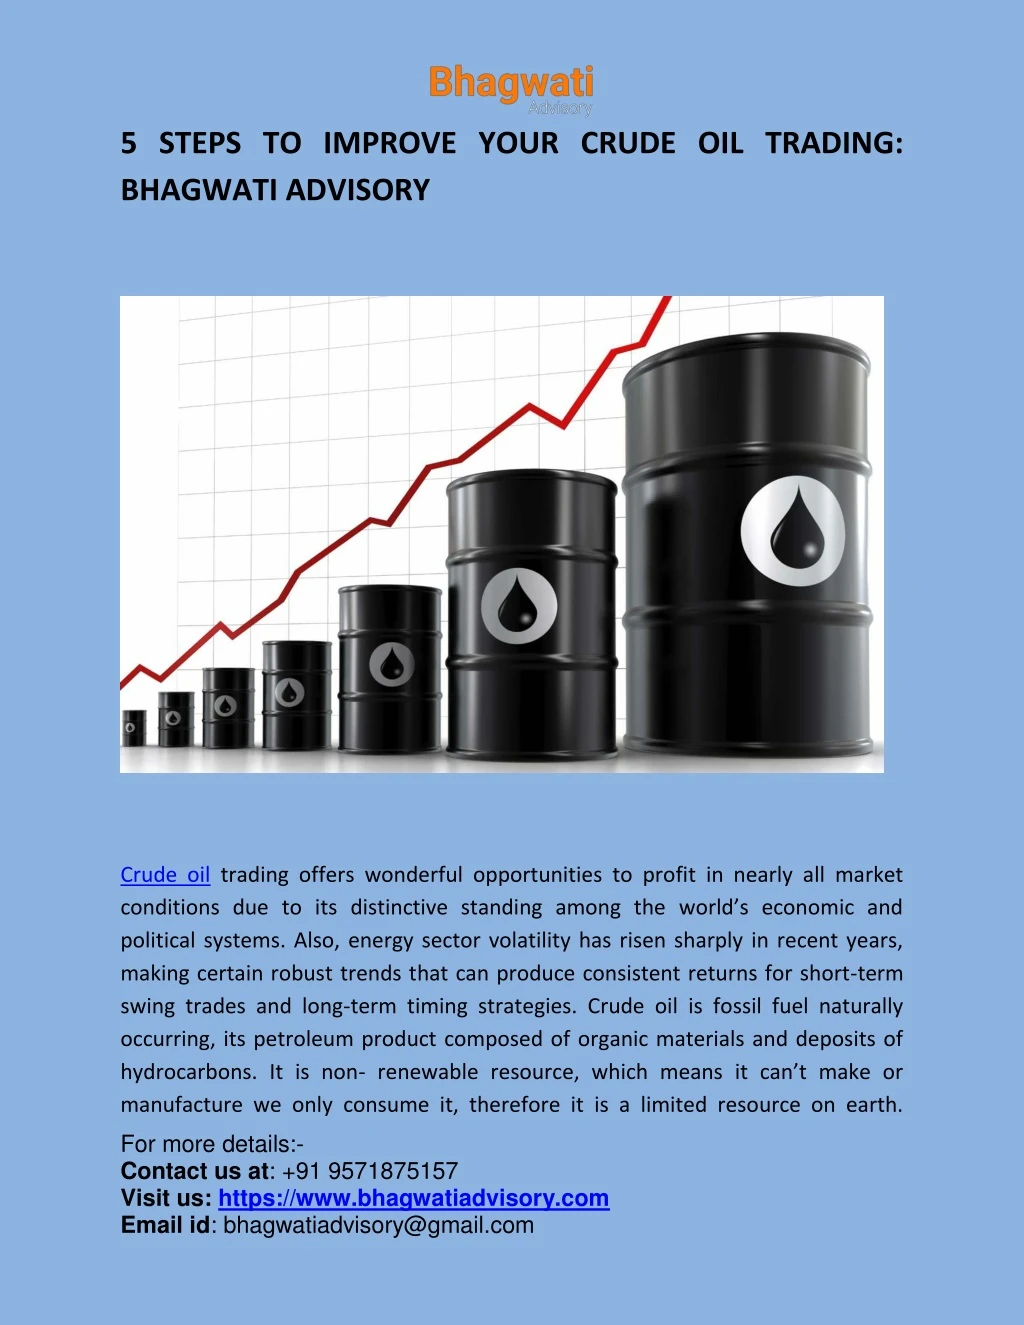 5 steps to improve your crude oil trading